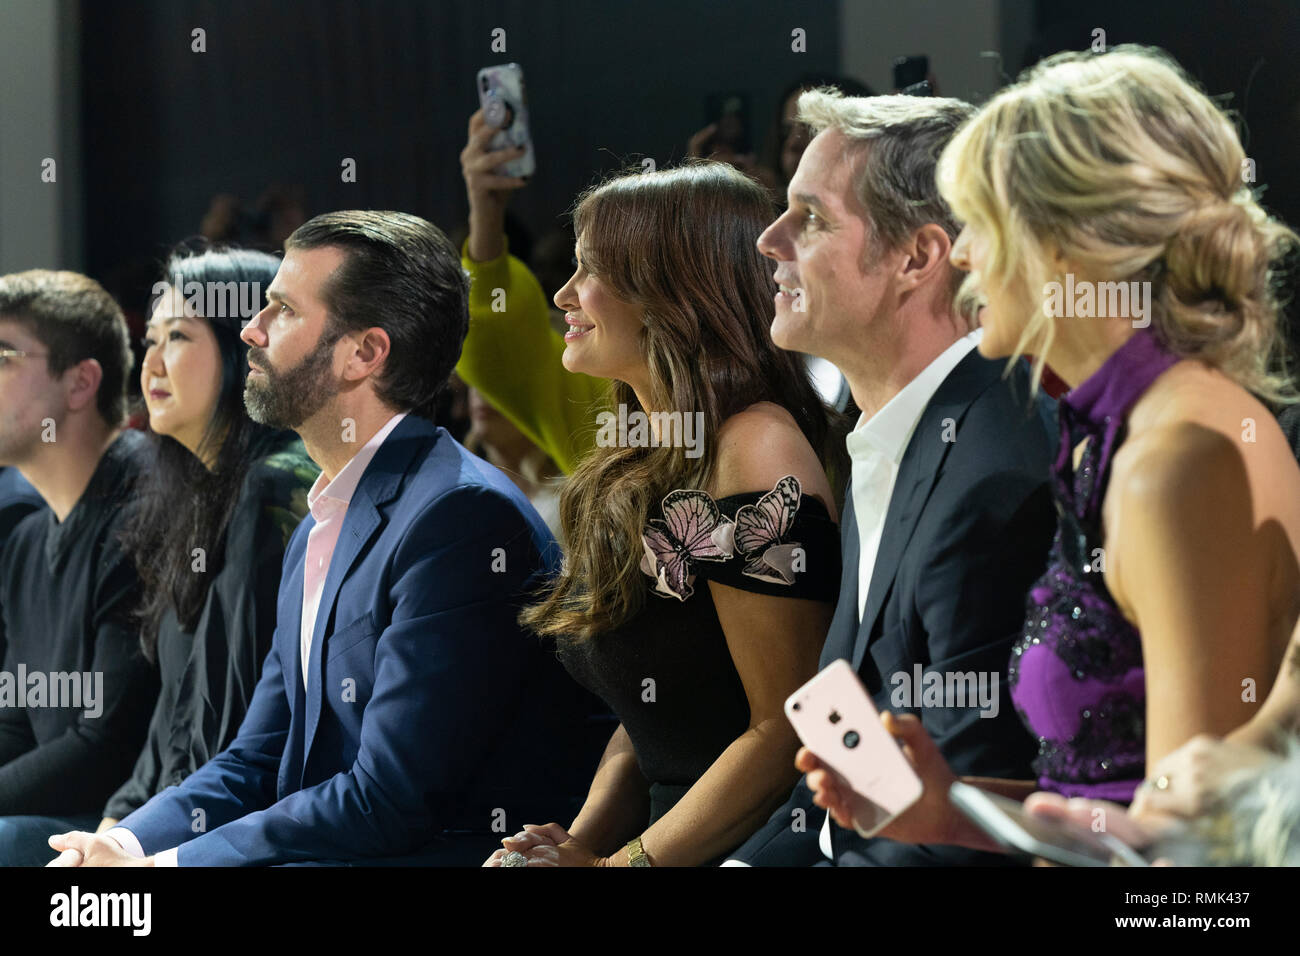 New York, NY - February 13, 2019: Susan Shin, Donald Trump Jr., Kimberly Guilfoyle, Bill Hemmer and Marla Maples attend runway for Zang Toi Fall/Winter collection during New York Fashion Week at Spring Studios Stock Photo